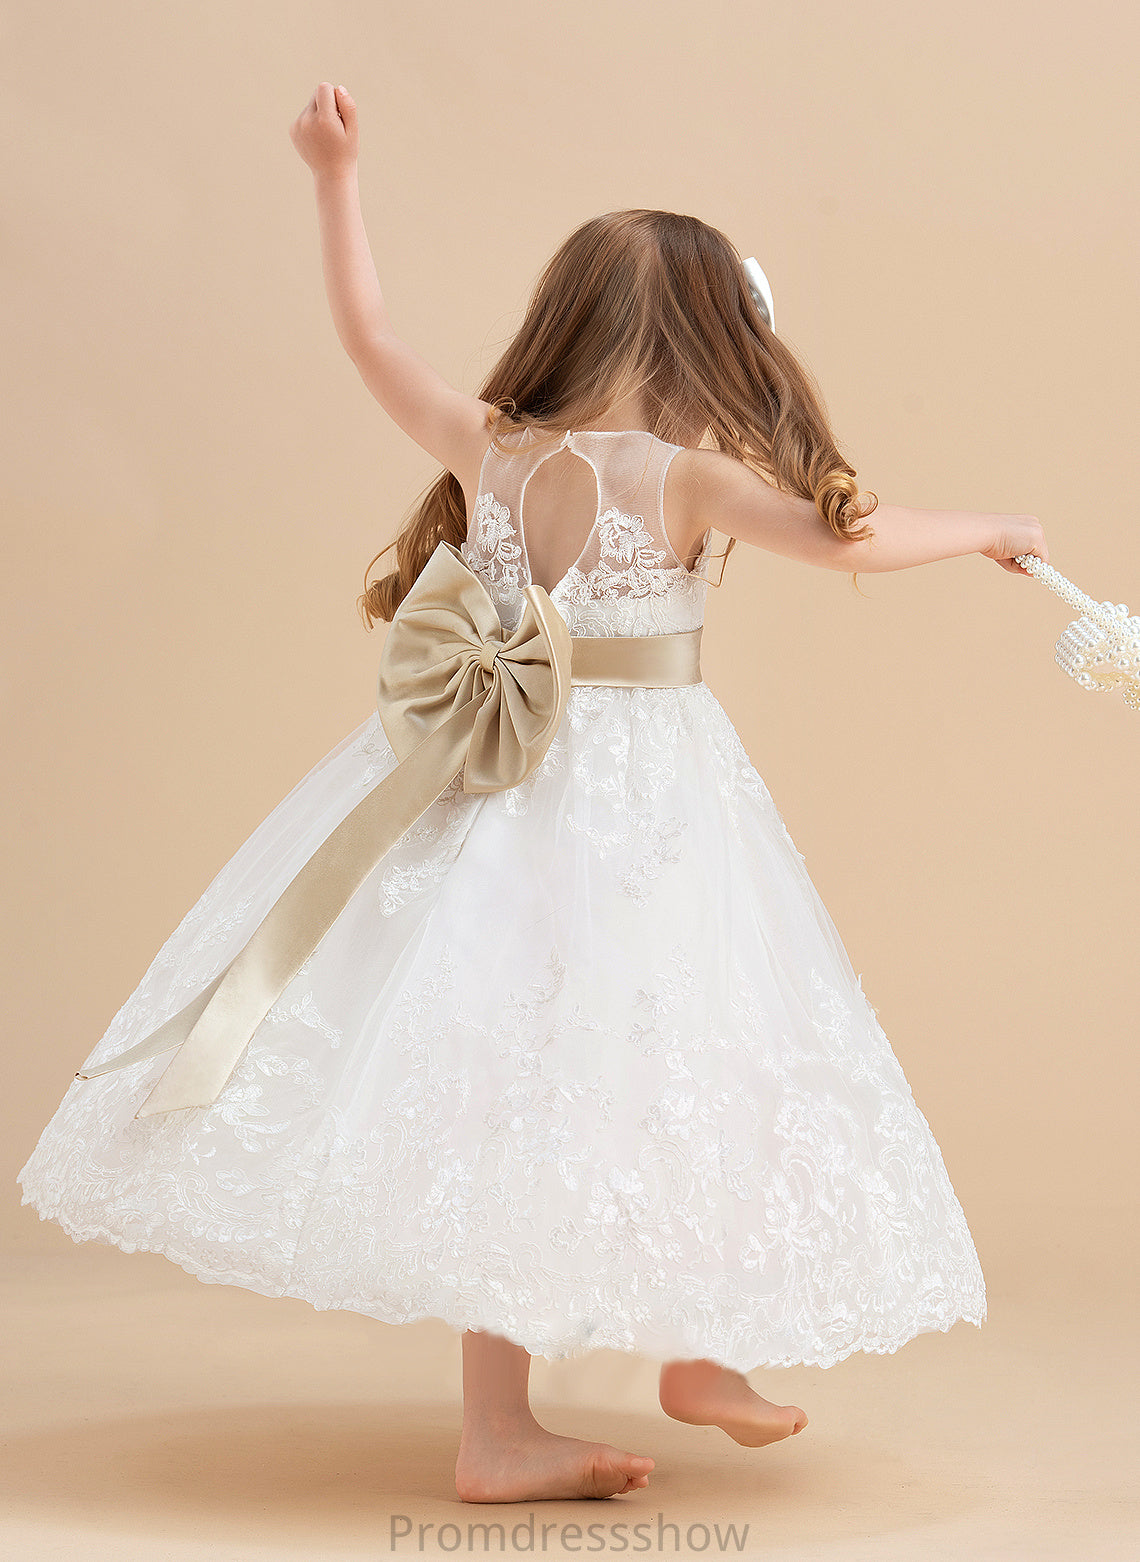 Scoop Sash/Bow(s) Flower Girl Dresses Satin/Tulle/Lace With Flower Dress Neck Ankle-length Claudia Sleeveless Girl A-Line/Princess -